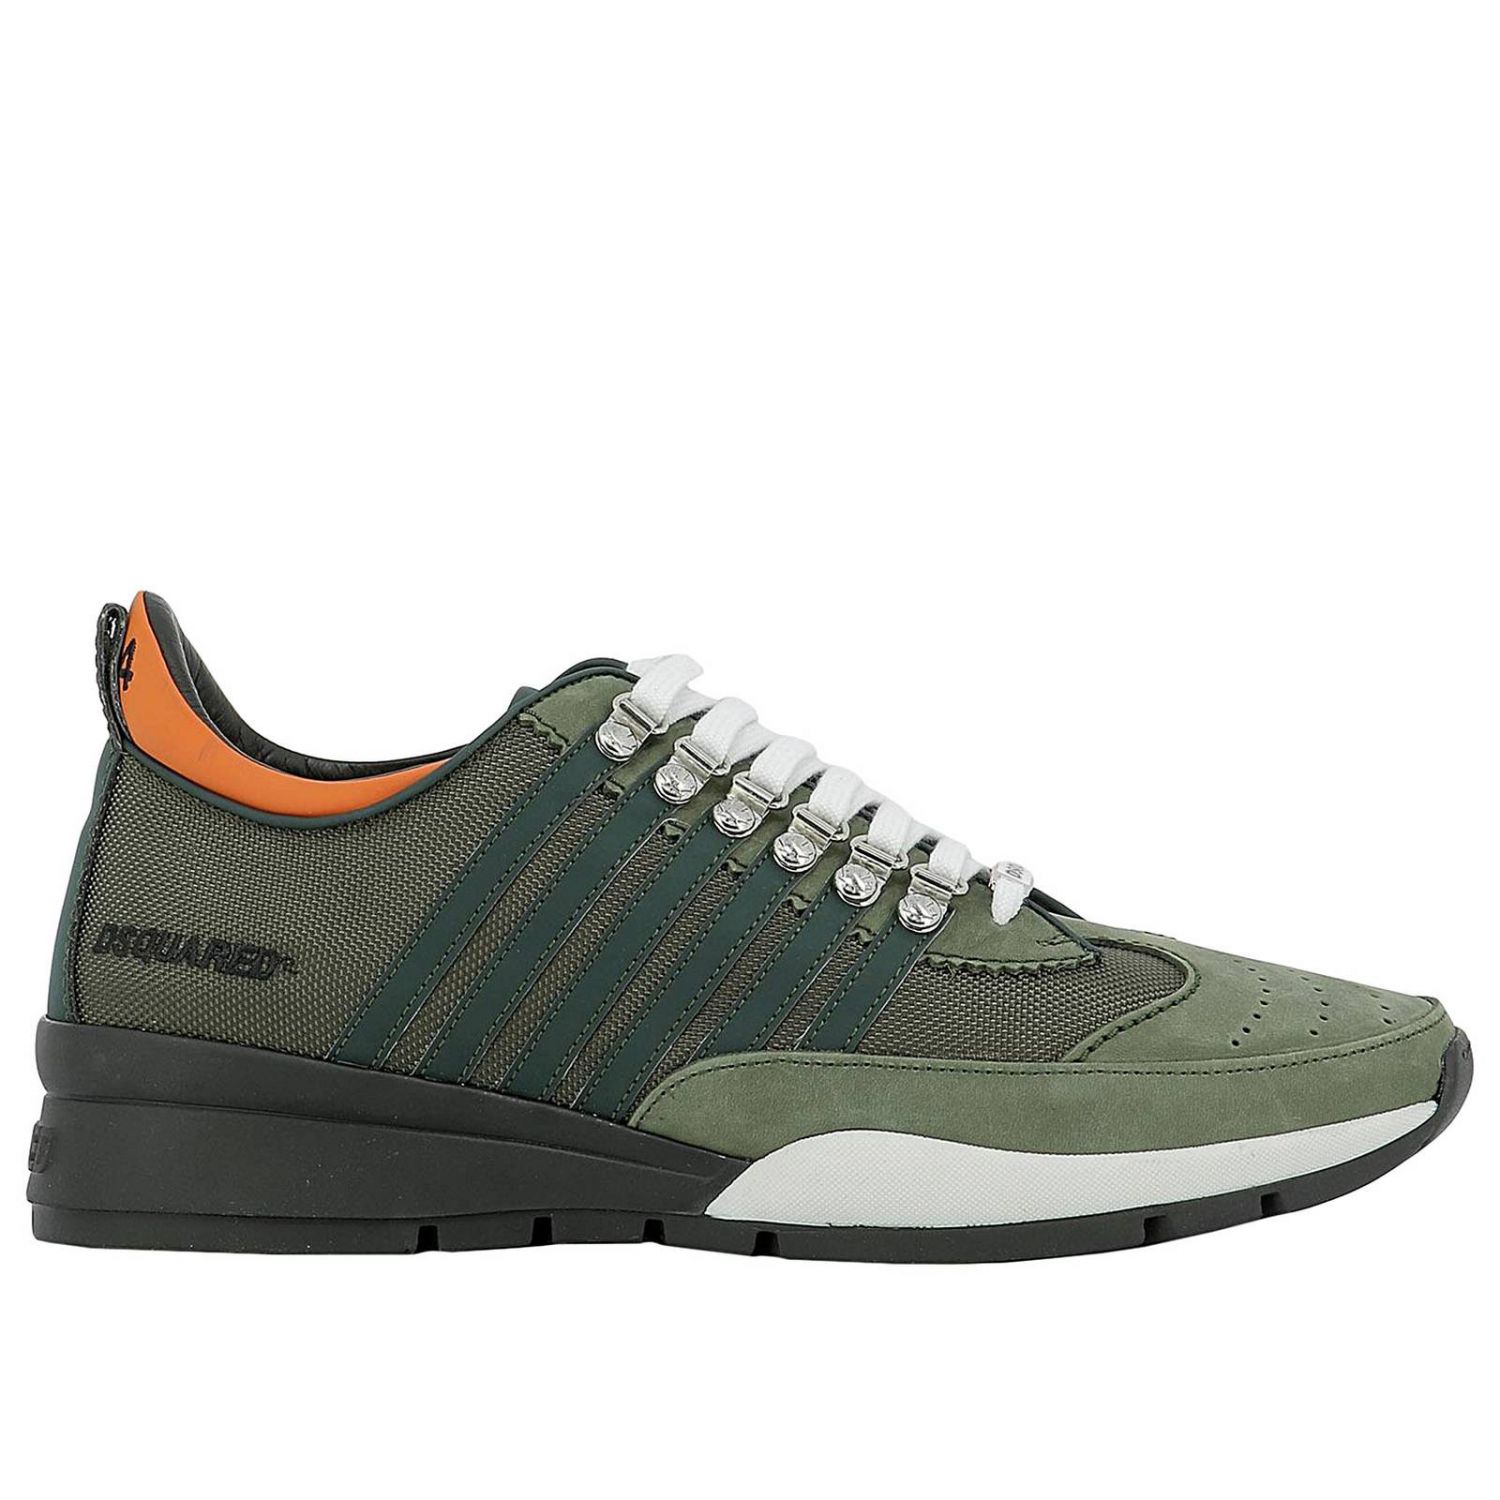 Dsquared2 Outlet: Sneakers men - Green | Sneakers Dsquared2 ...